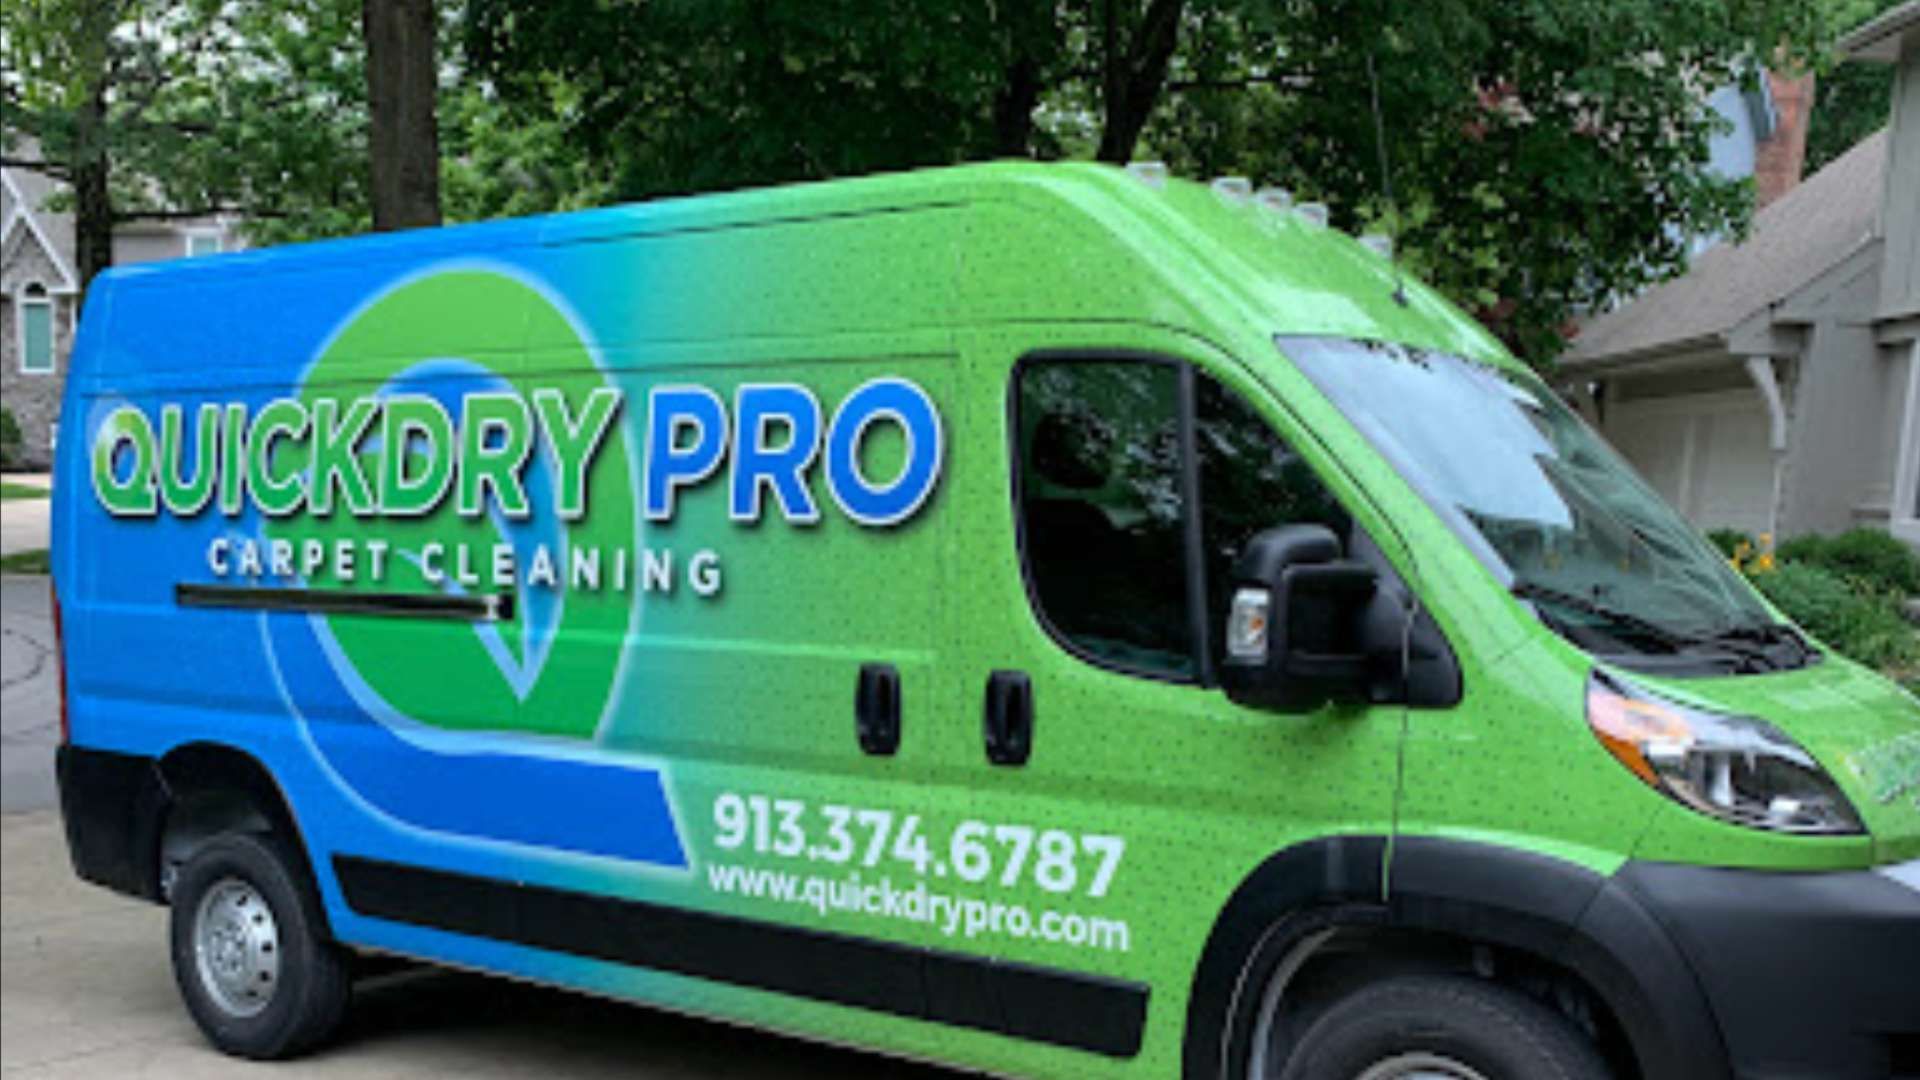 QuickDry Pro Carpet Cleaning Truck